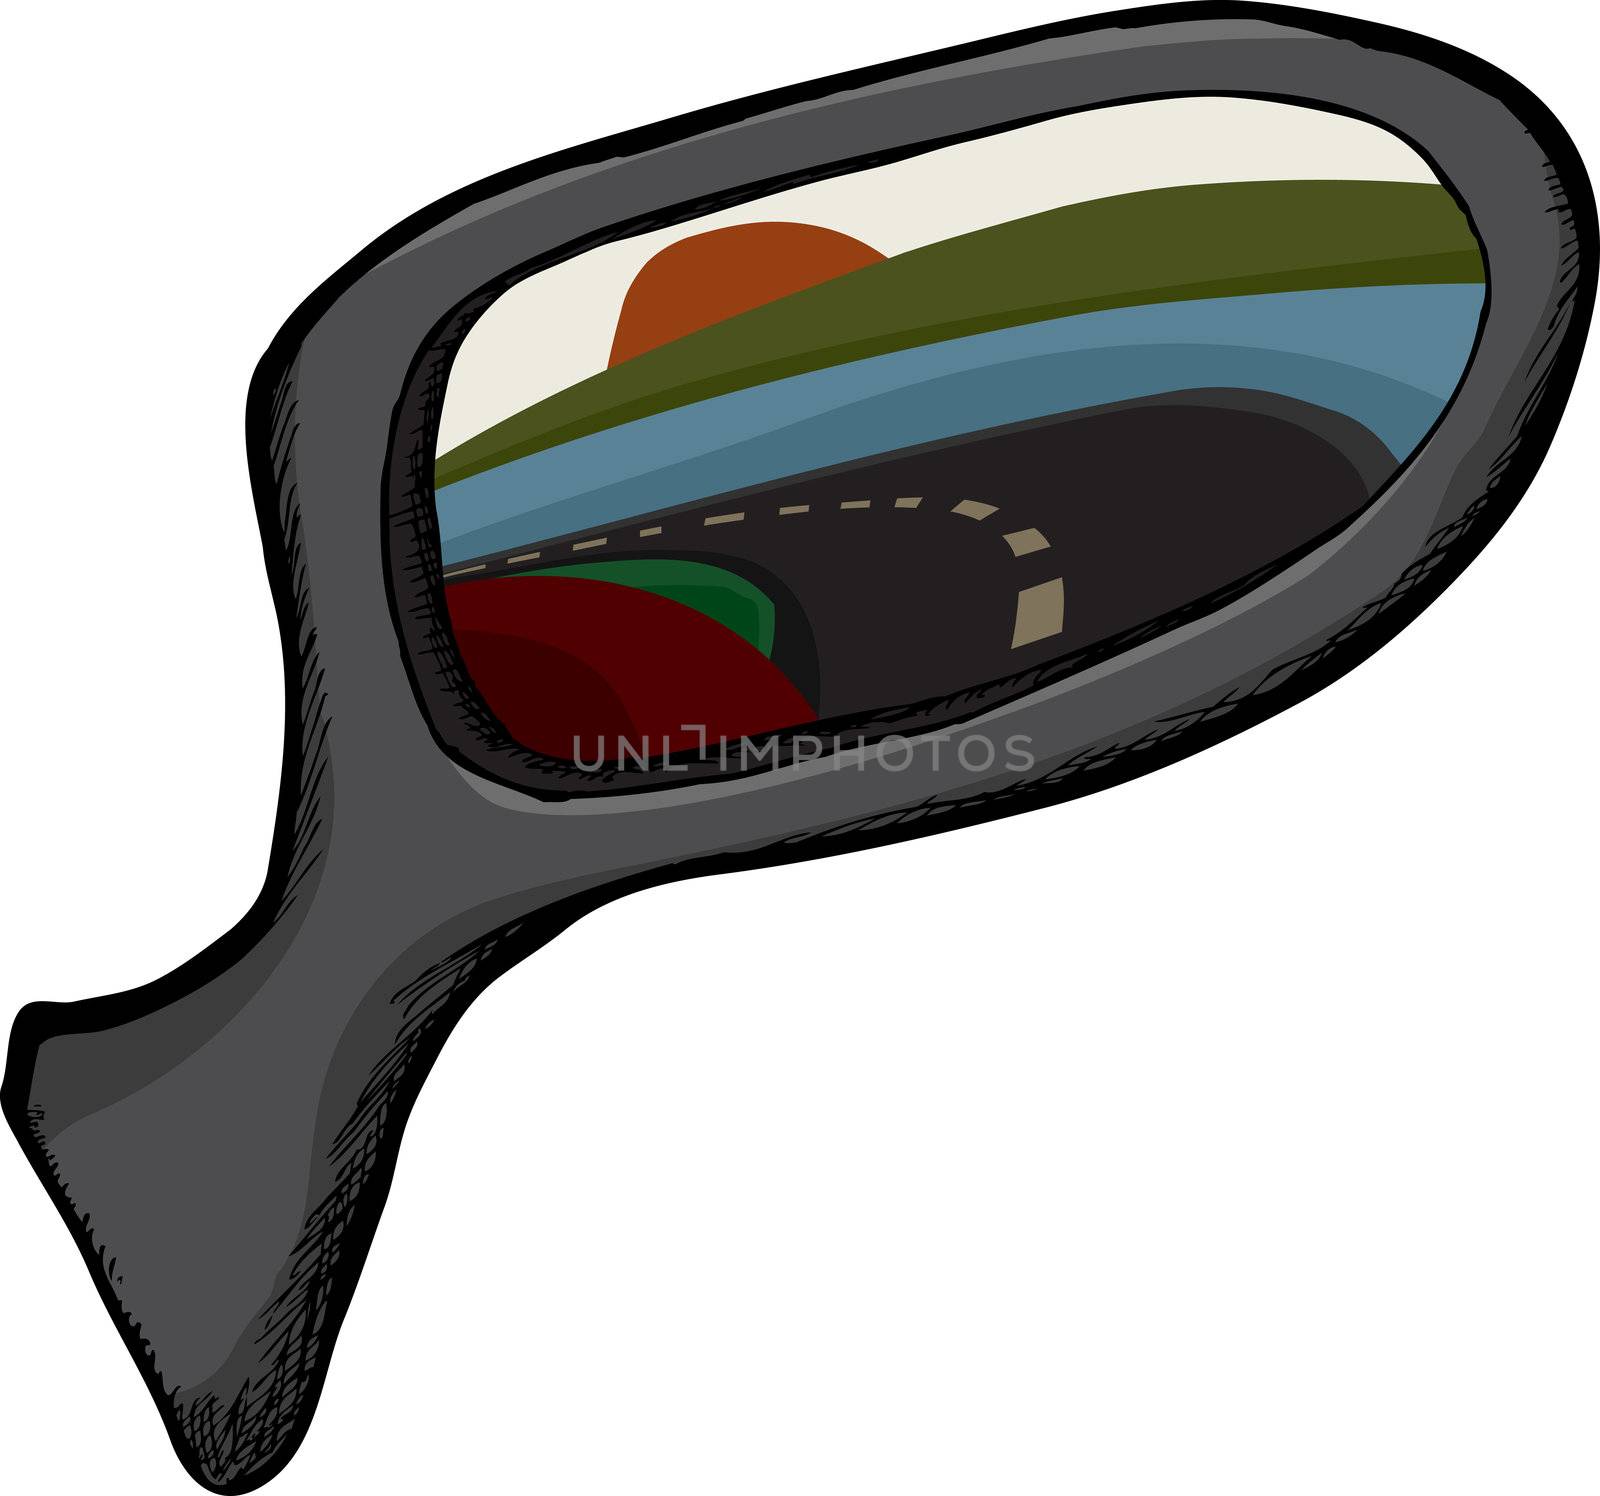 Side view mirror with reflection of back of vehicle and road